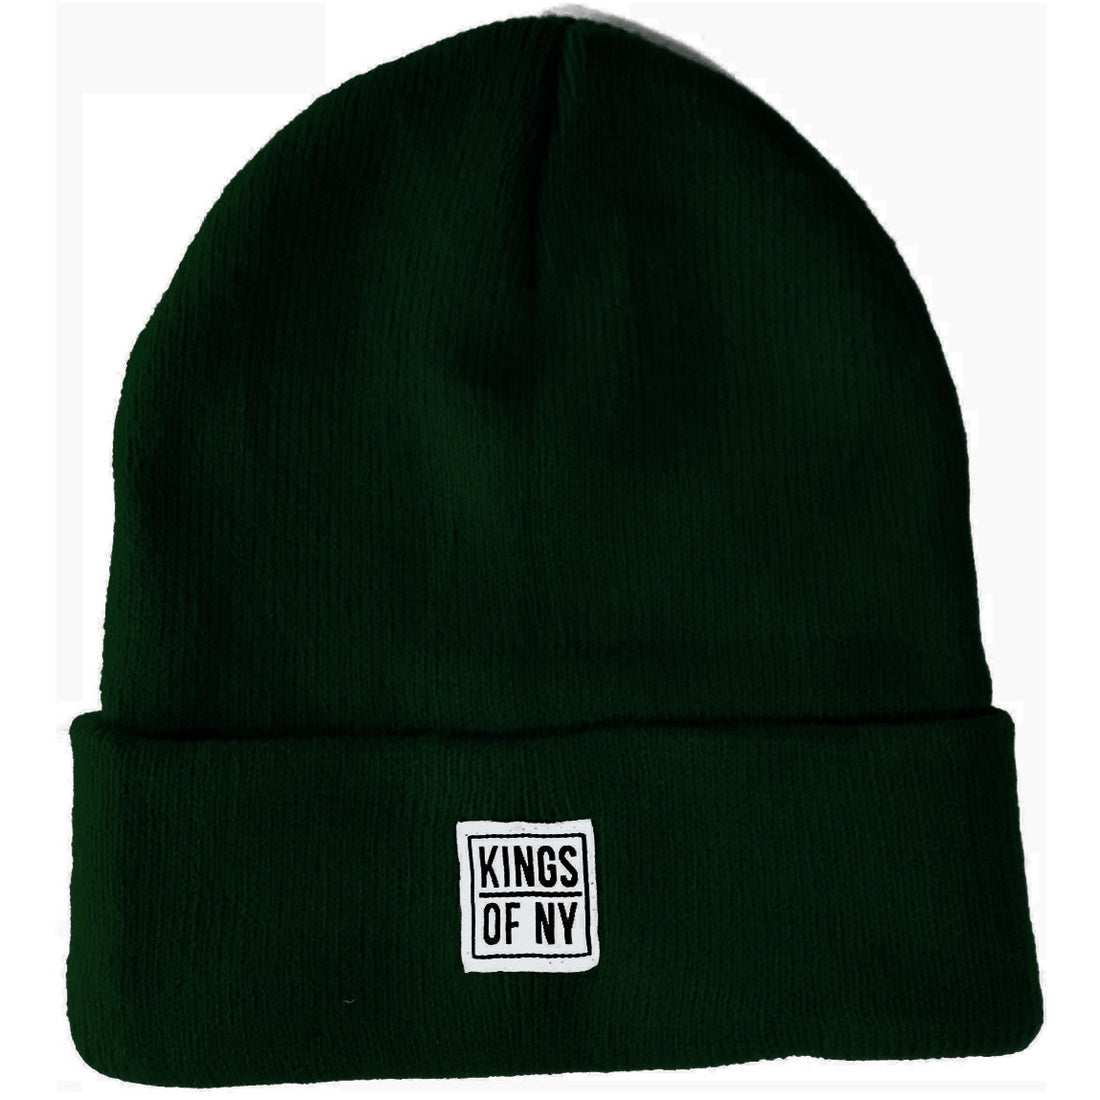 Forest Green Beanie Hat by Kings Of NY